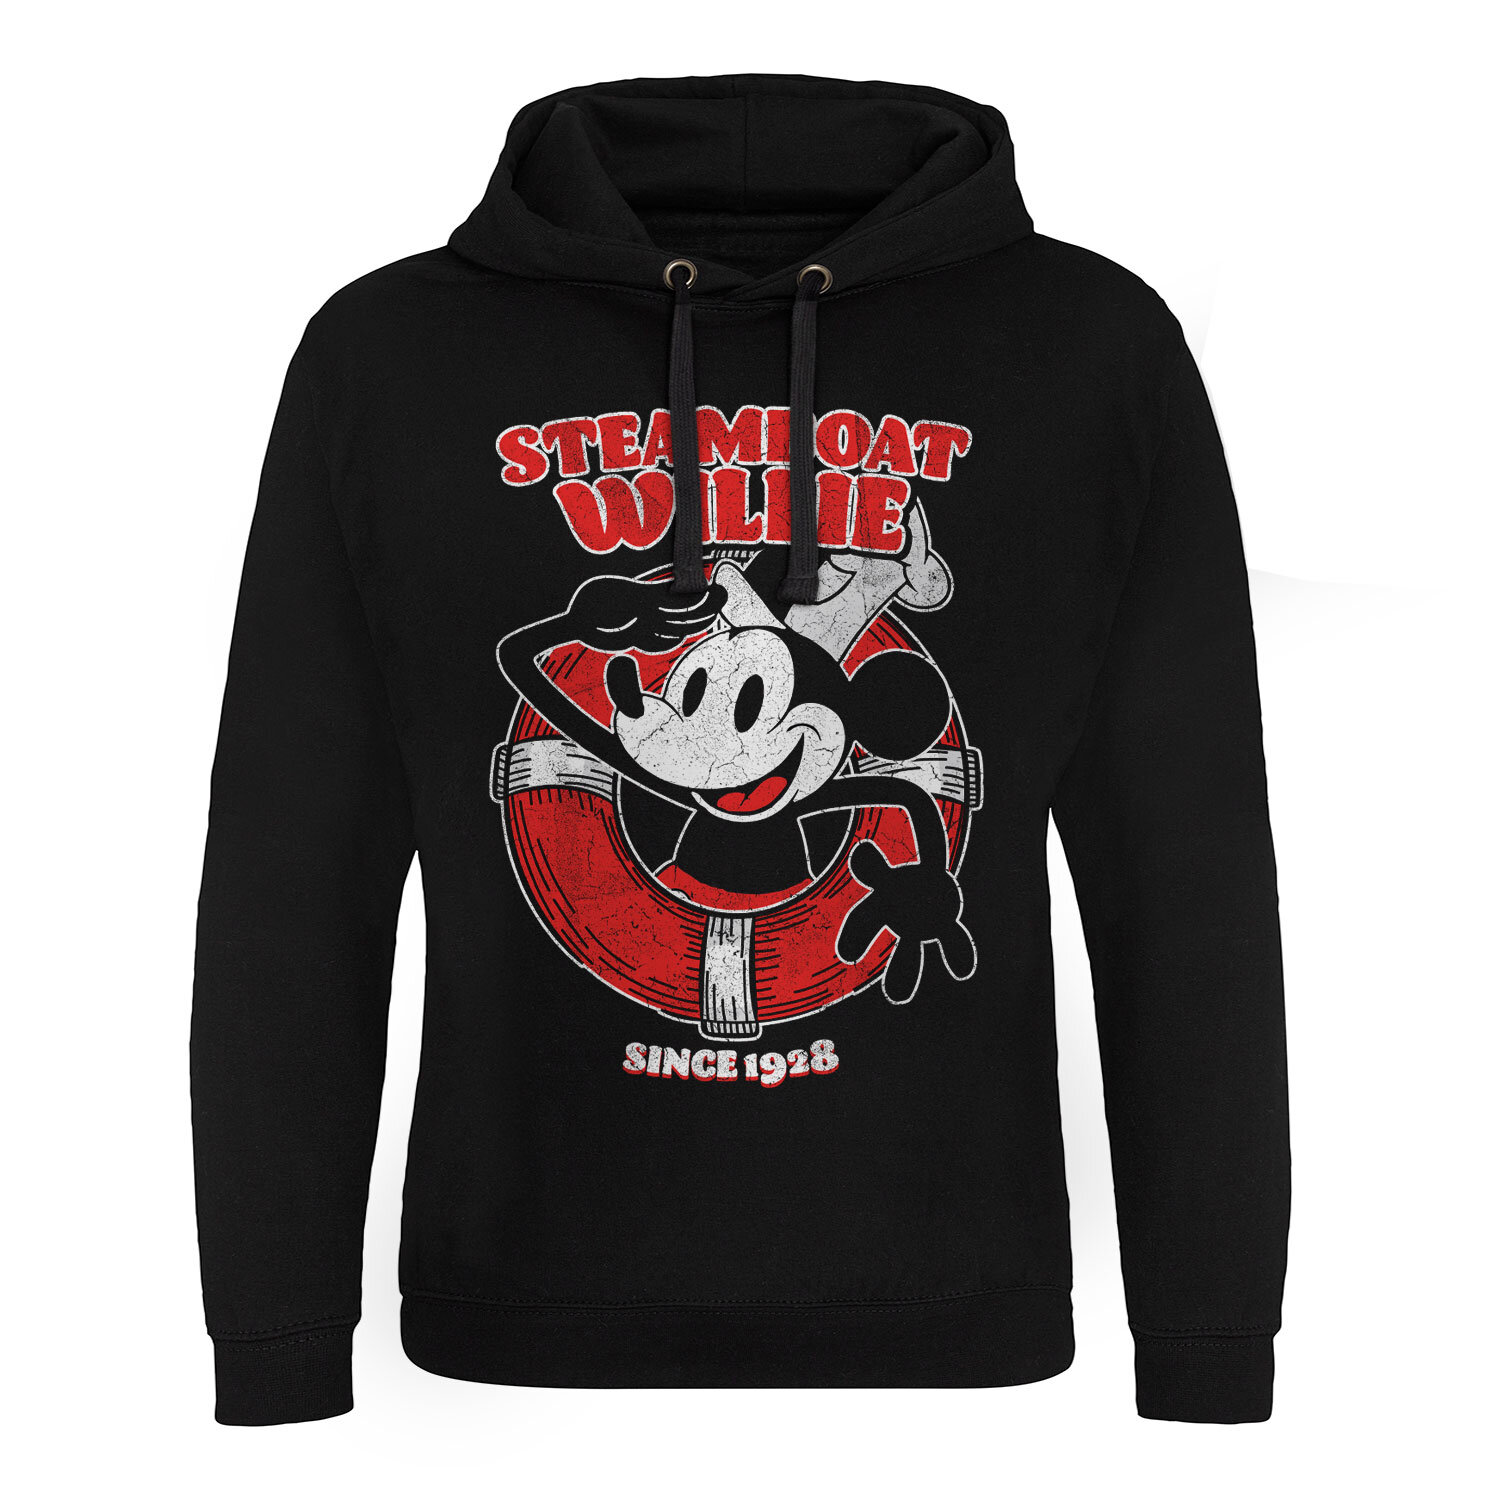 Steamboat Willie Since 1928 Epic Hoodie